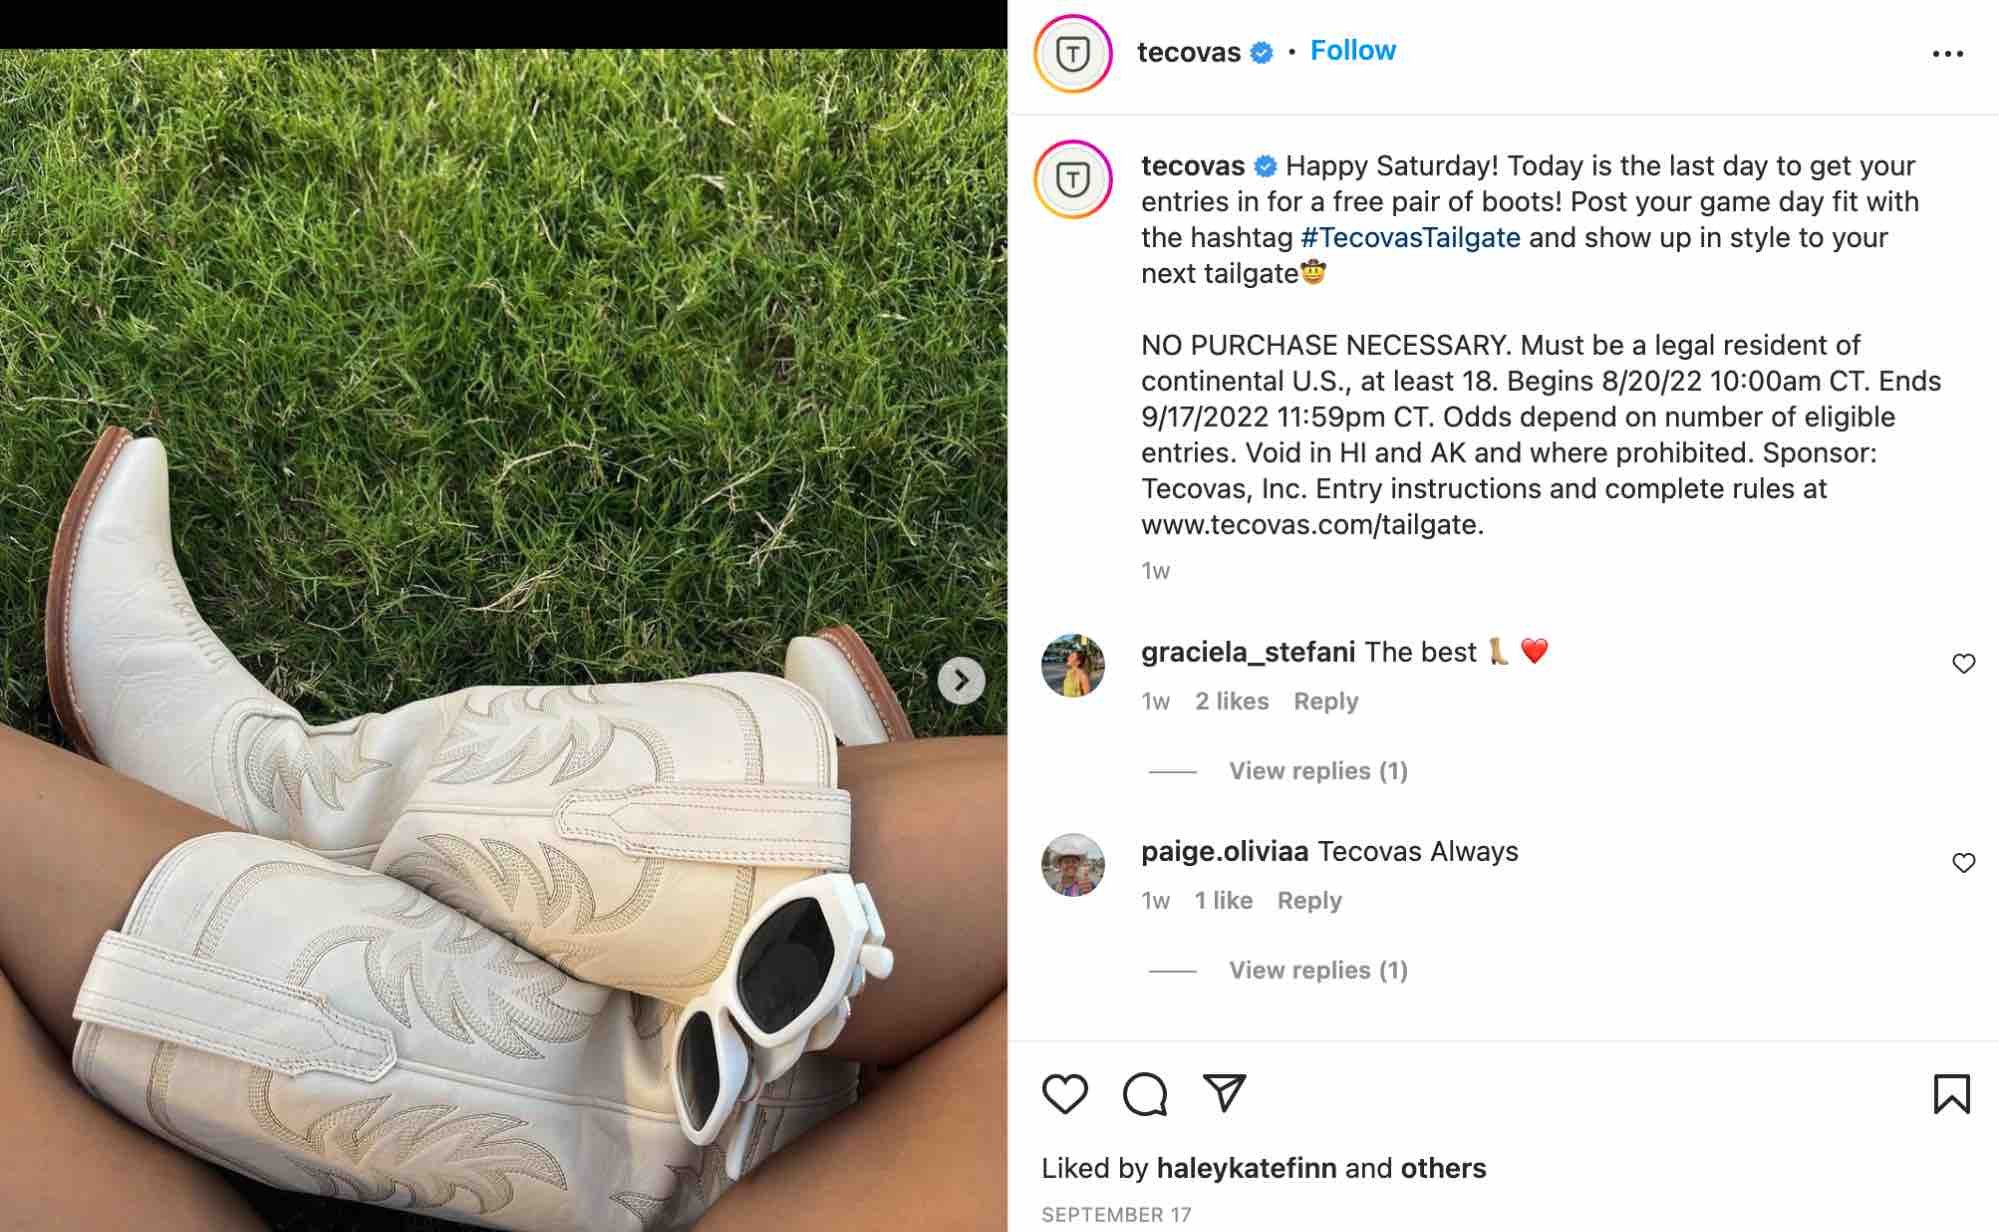 instagram marketing for small business, an Instagram post from boot brand Tecovas demonstrates how branded hashtags can be effective for Instagram marketing strategy for a small business.